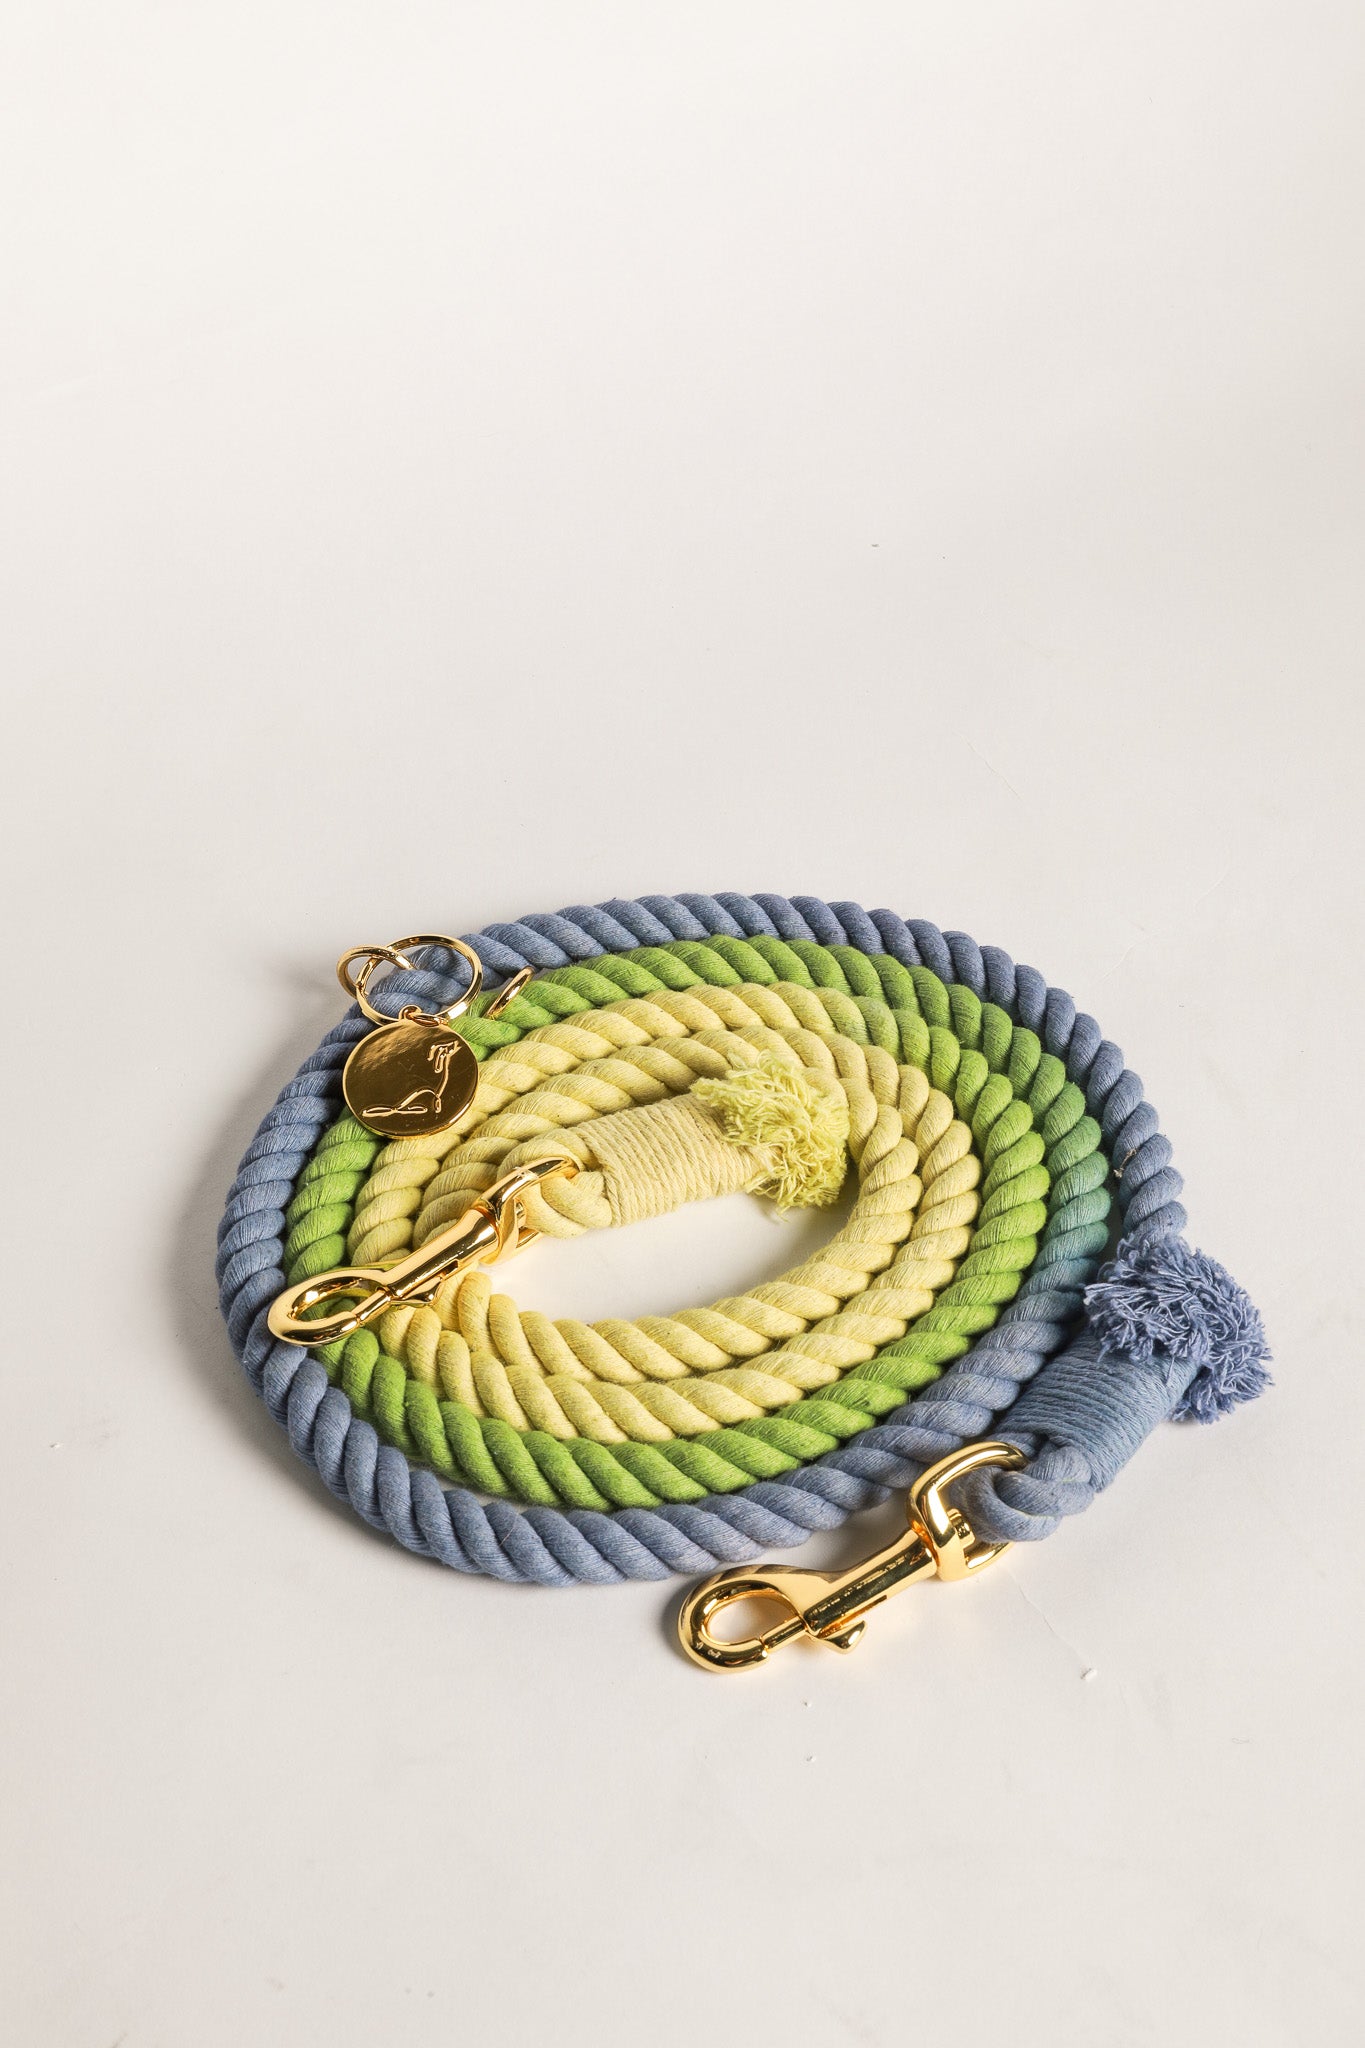 DOG LEASH HANDS FREE COTTON ROPE - Ombré Blue Green Yellow